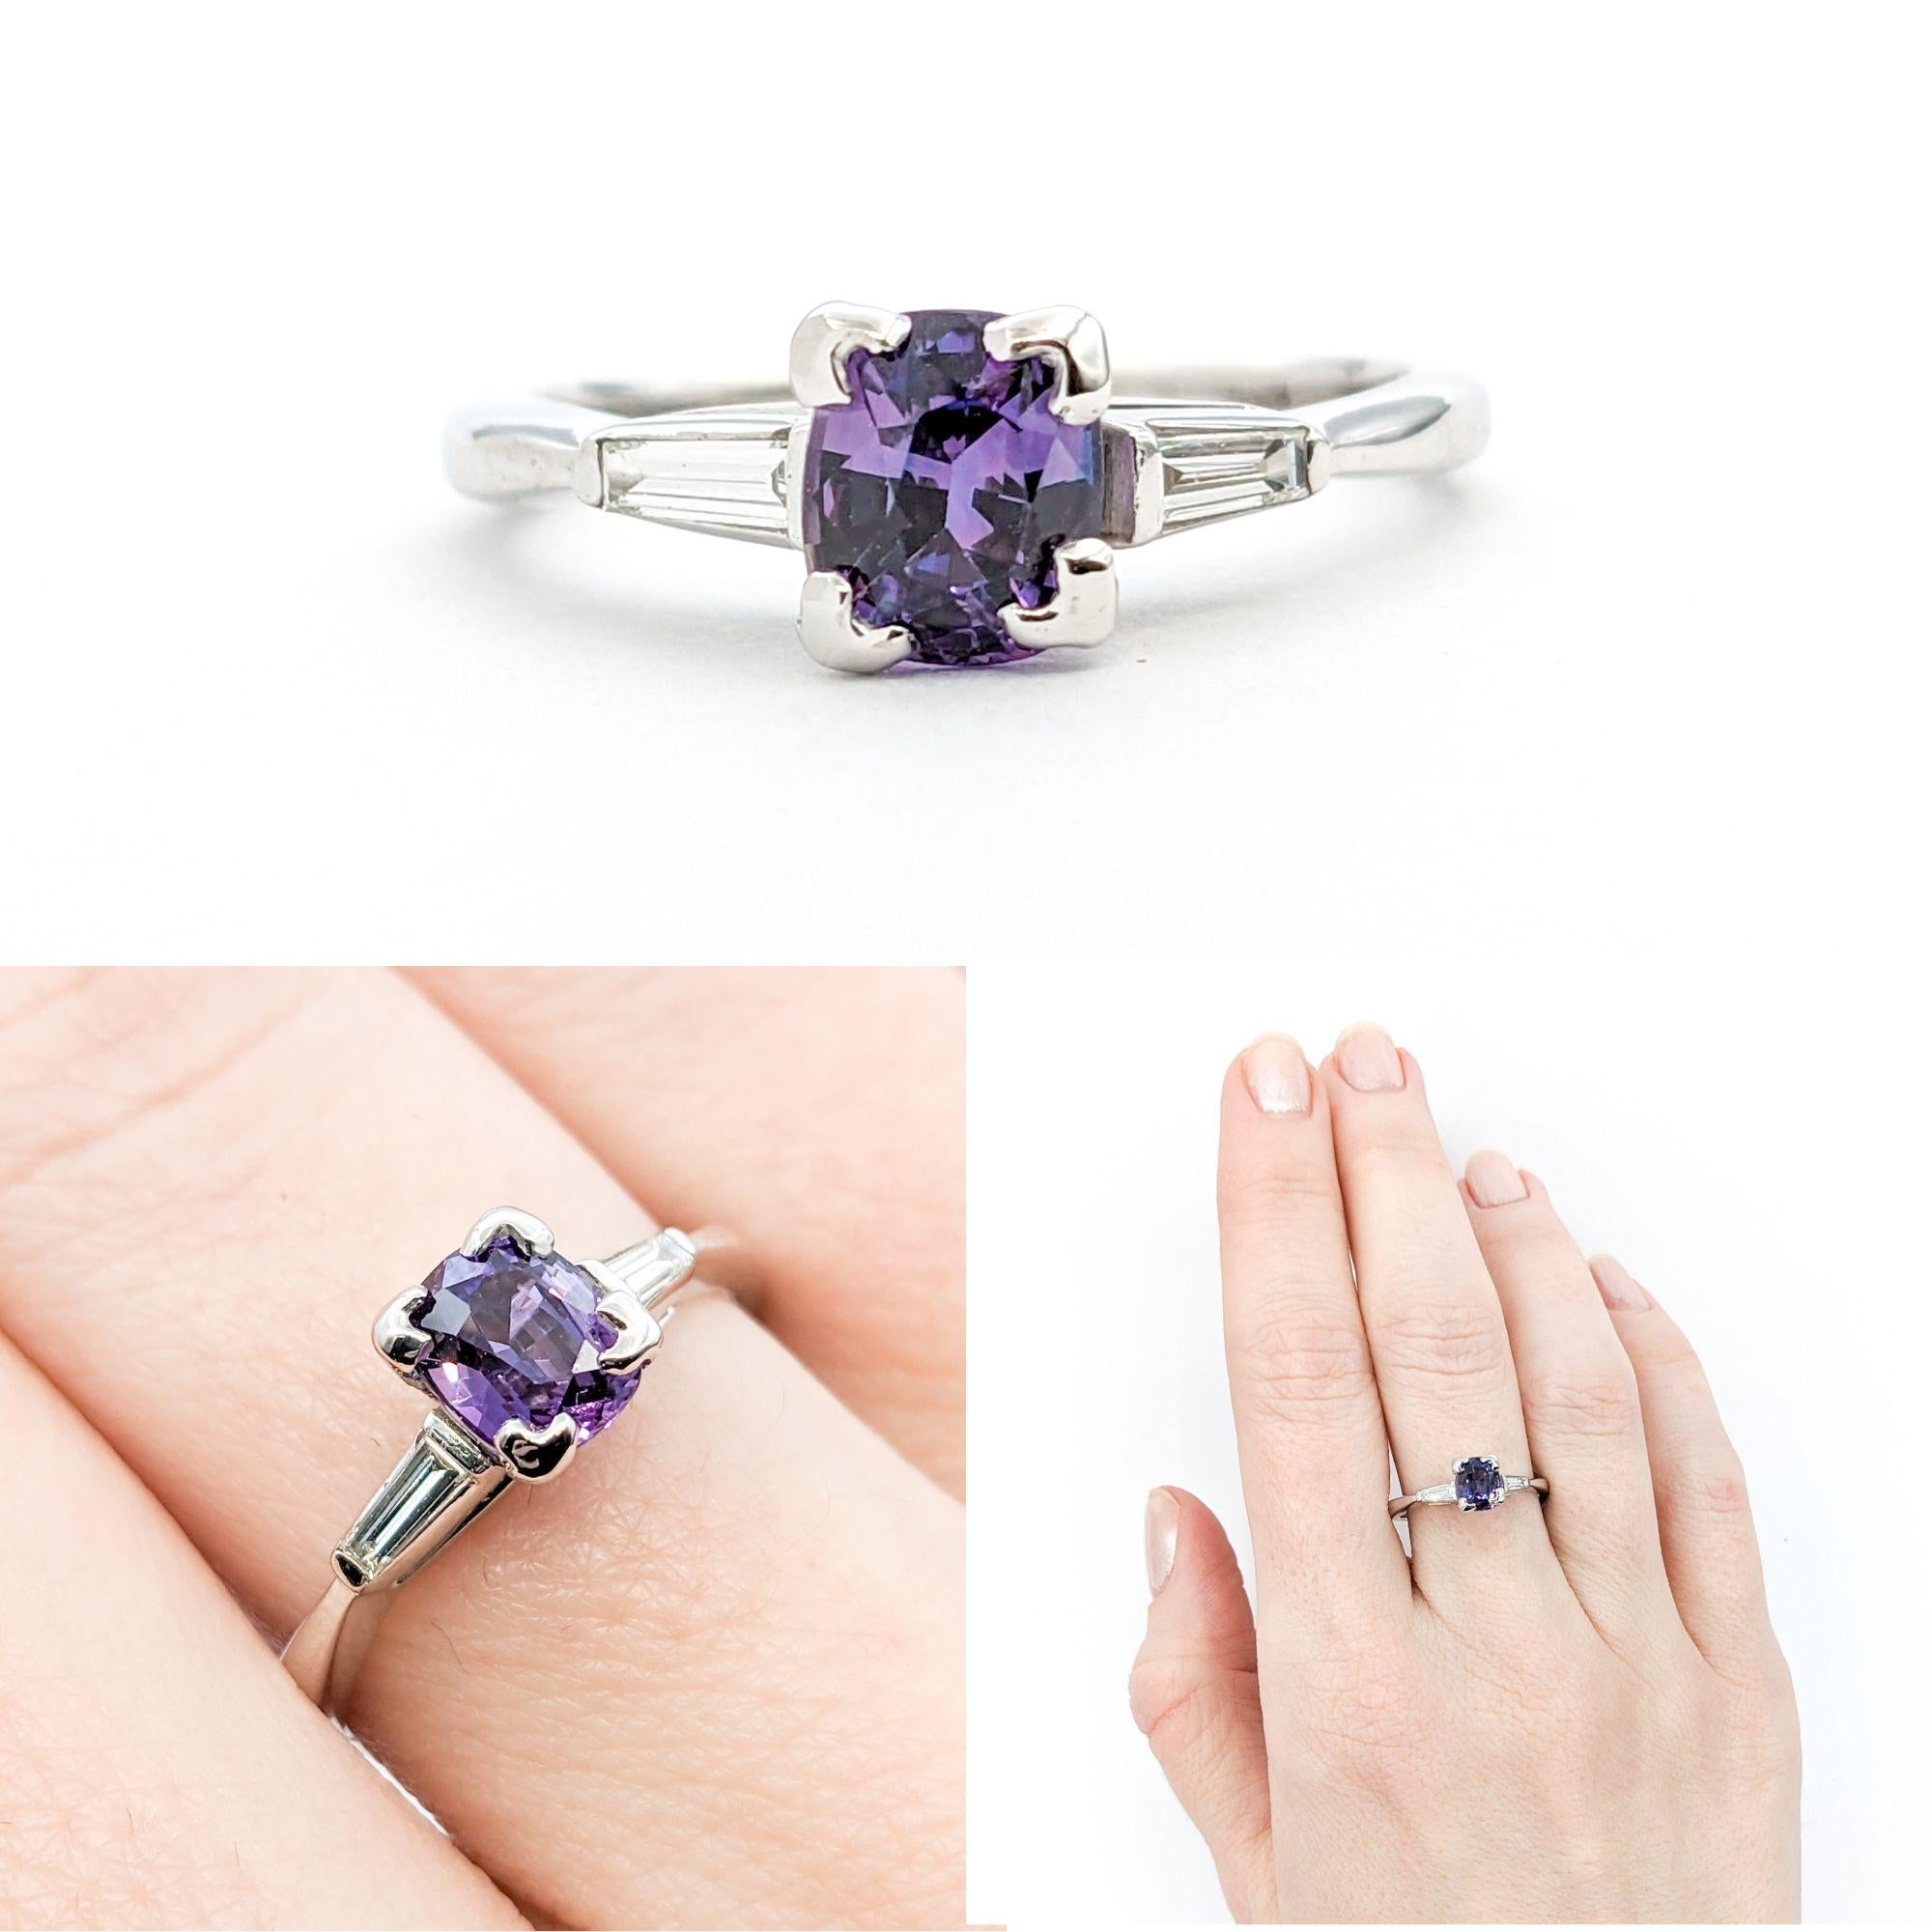 1.13ct Purple Spinel & Diamond Ring In White Gold

Introducing a stunning Ring, meticulously crafted in bright 14k White Gold, that exudes elegance and sophistication. This piece features a captivating 1.13ct Purple Spinel, a gemstone known for its